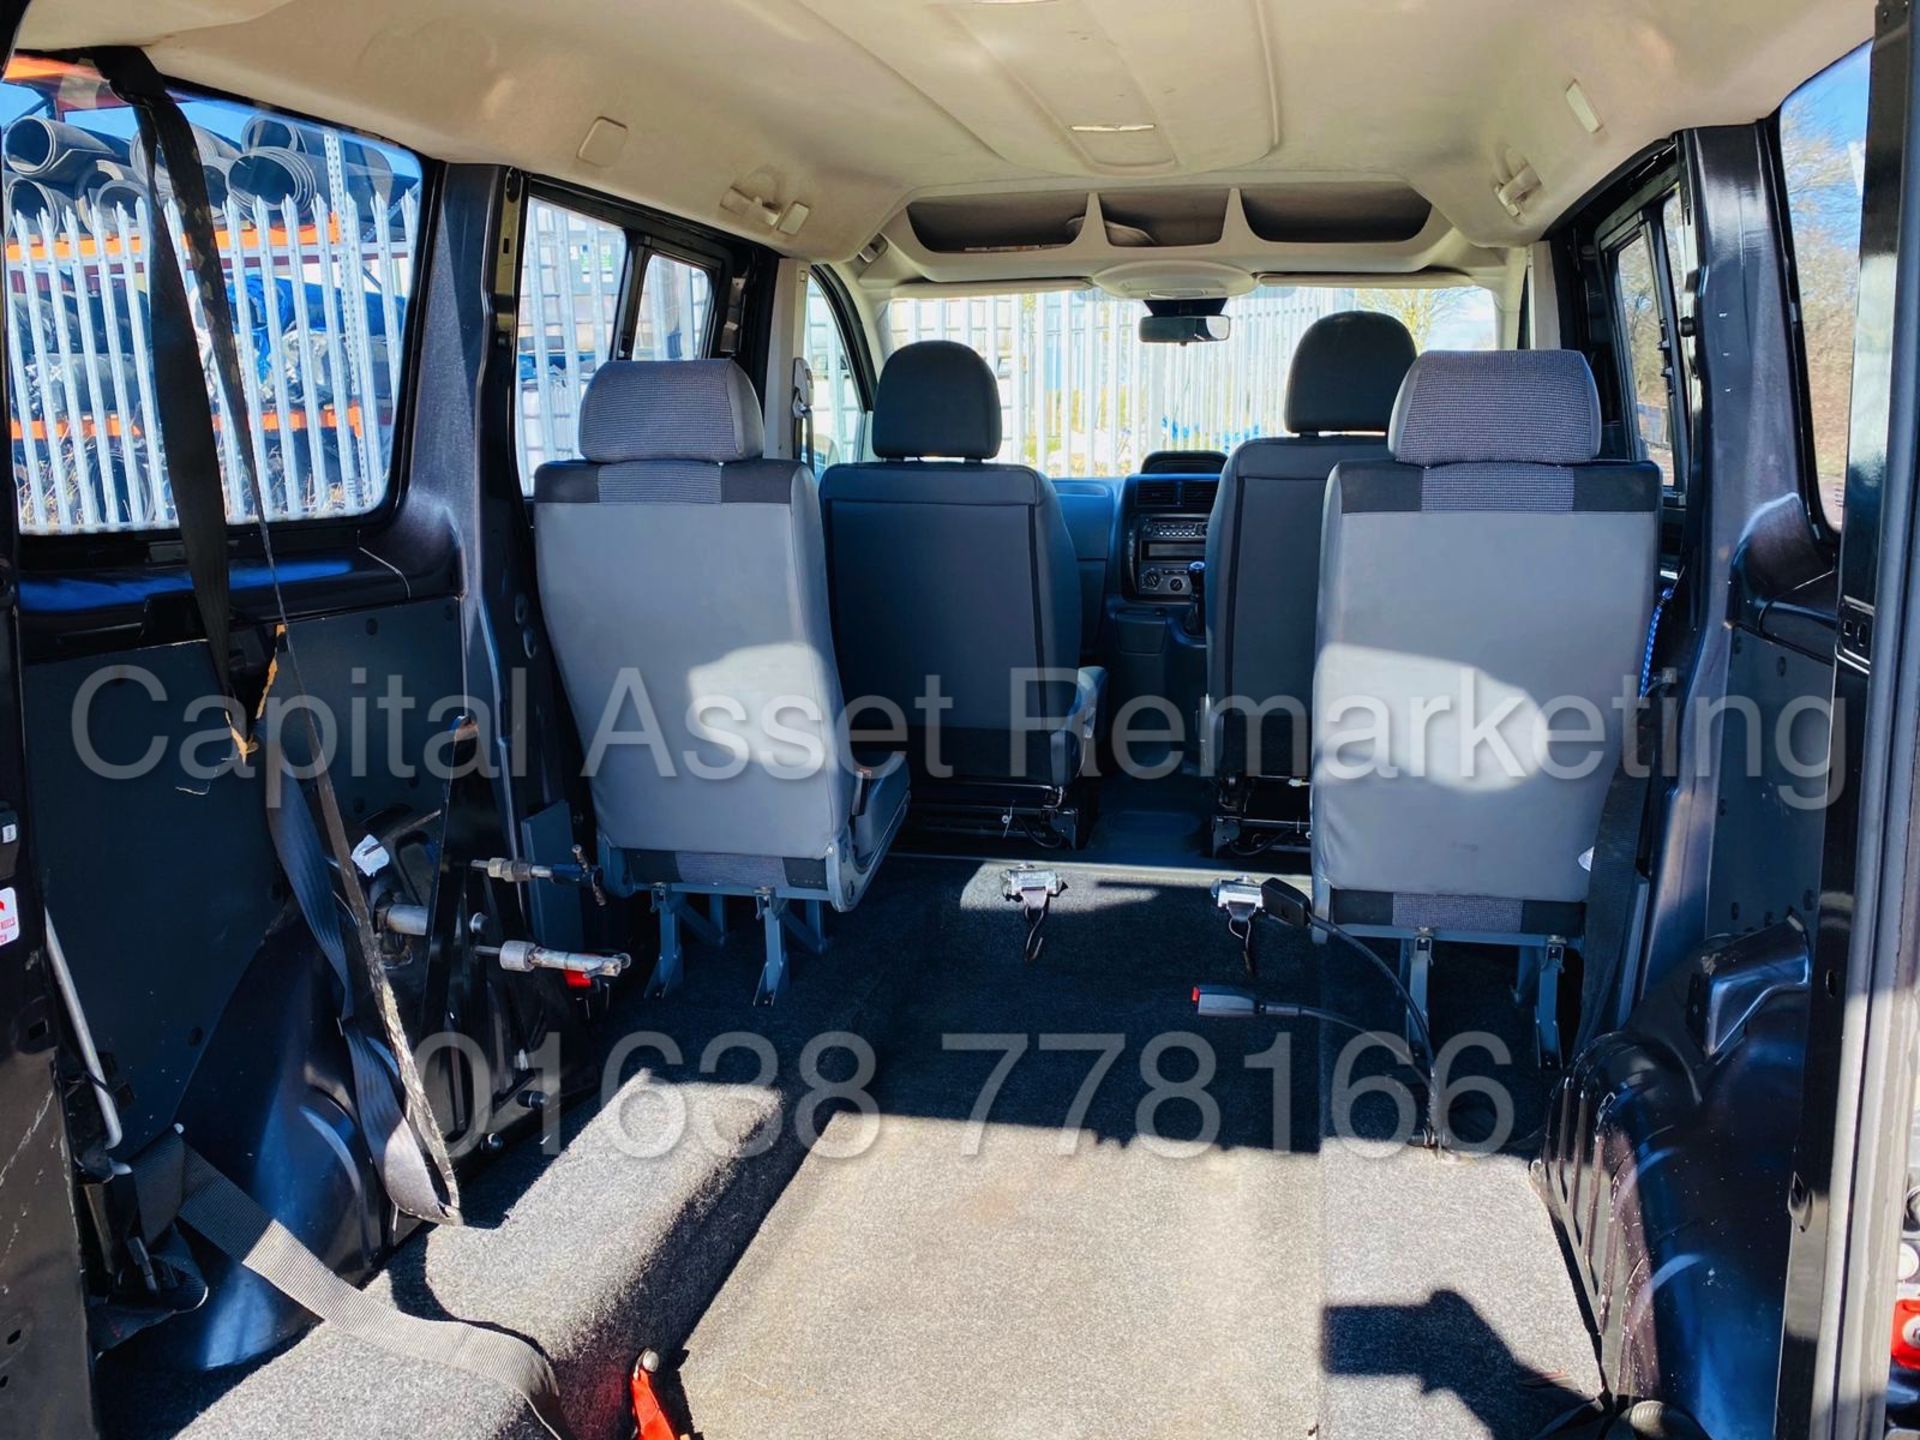 (On Sale) PEUGEOT EXPERT *TEPEE COMFORT* (61 REG) *DISABILITY / WHEEL CHAIR ACCESS VEHICLE* (NO VAT) - Image 20 of 30